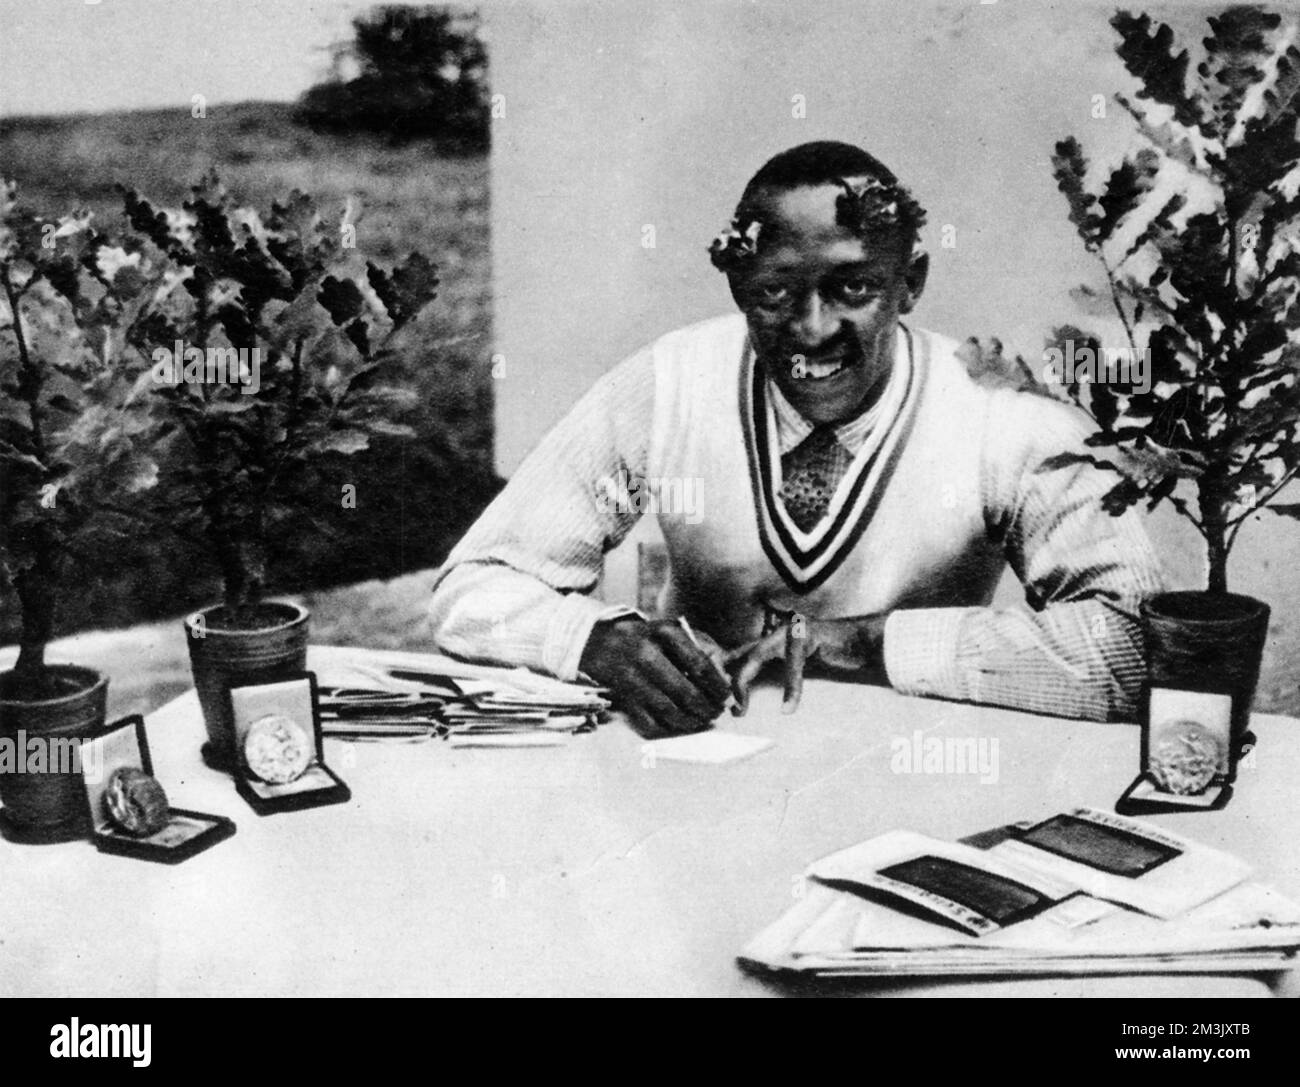 Jesse James Cleveland Owens (1913 - 1980), US athlete, pictured with his Olympic oak-trees and medals.  Owens won four gold medals at the the 1936 Berlin Olympics - the 100 metres, the 200 metres, the long jump and the 4x100 metres relay.  1936 Stock Photo